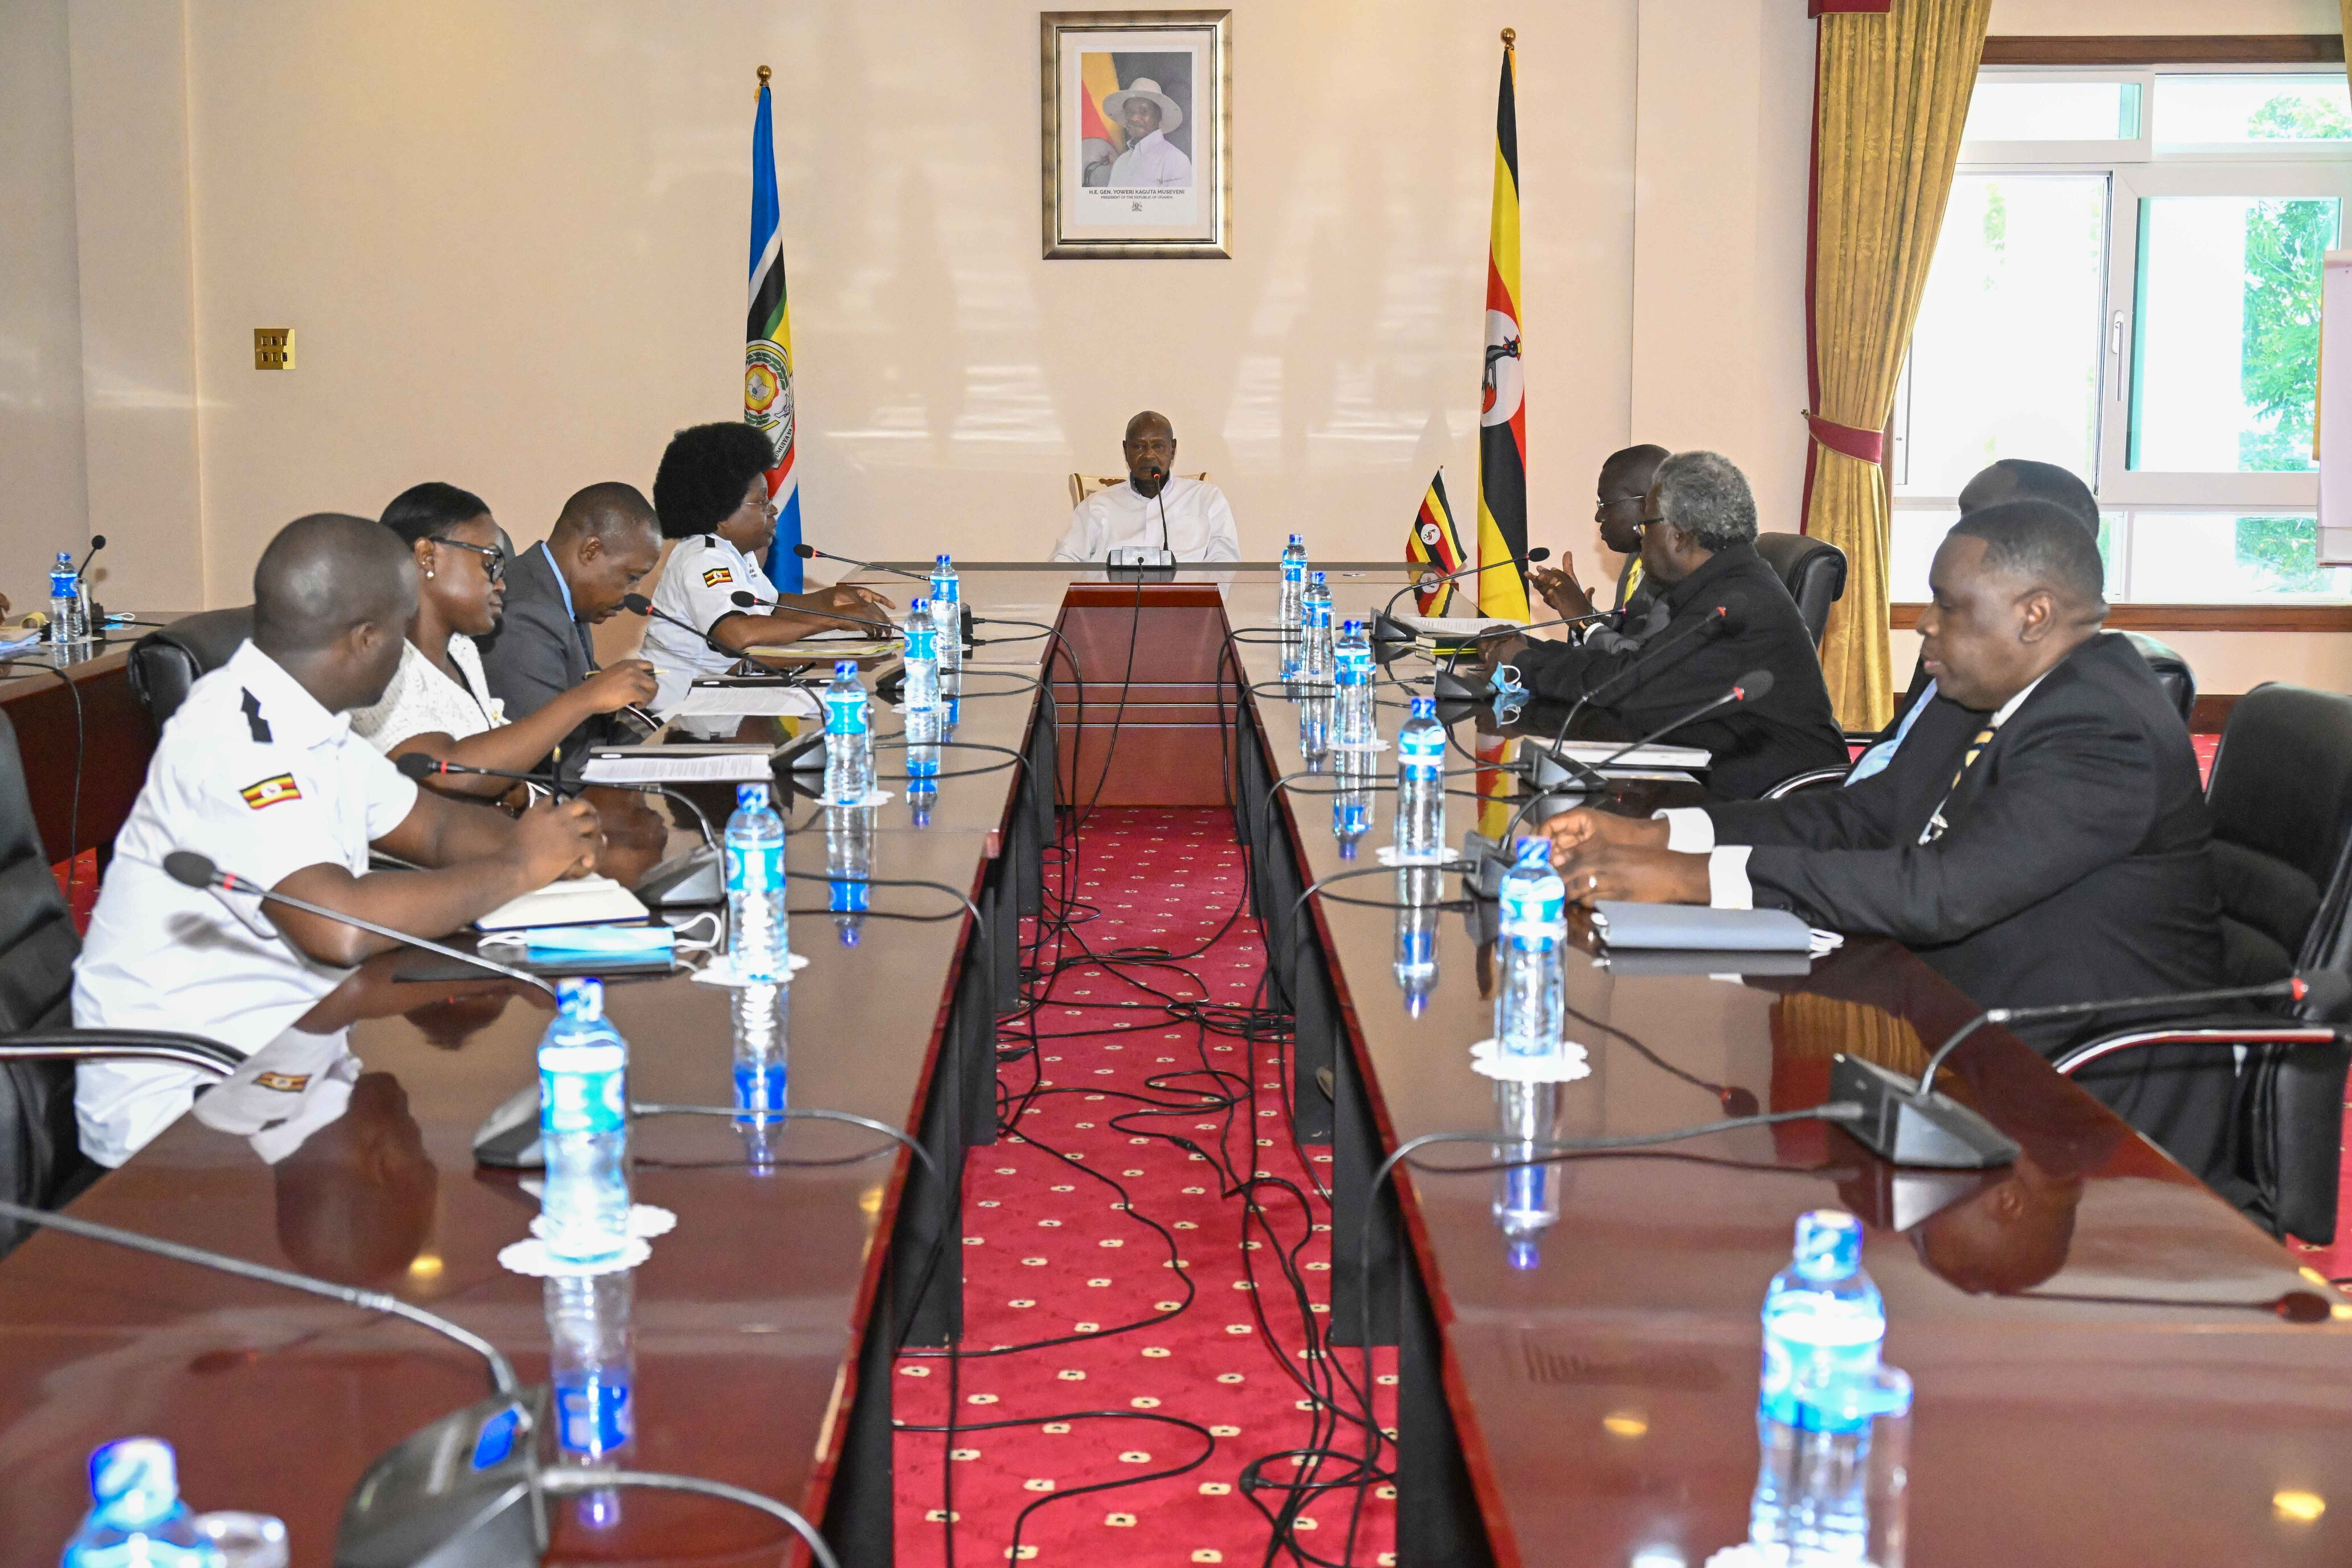 President Yoweri Kaguta Museveni a meeting with the Minister for Science, Technology, and Innovation Monica Musenero, State Minister for Foreign Affairs in charge of Regional Affairs John Mulimba, Kiira Motors Executive Chairman Prof. Tickodri Togboa, Paul Musaasizi, Dr. Allan Muhumuza, Ms. Carthy Muwumuza, Dr. Cosmas Mwikirize, David Gonahaza and Dr Wakadi Patrick when a briefing to the President of Uganda on the progress of the Kayoola buses and the work with the H.E to position the Kayoola buses for the regional Market, the meeting took place at the State House Entebbe on the 2nd July 2024. Photo by PPU/Tony Rujuta.